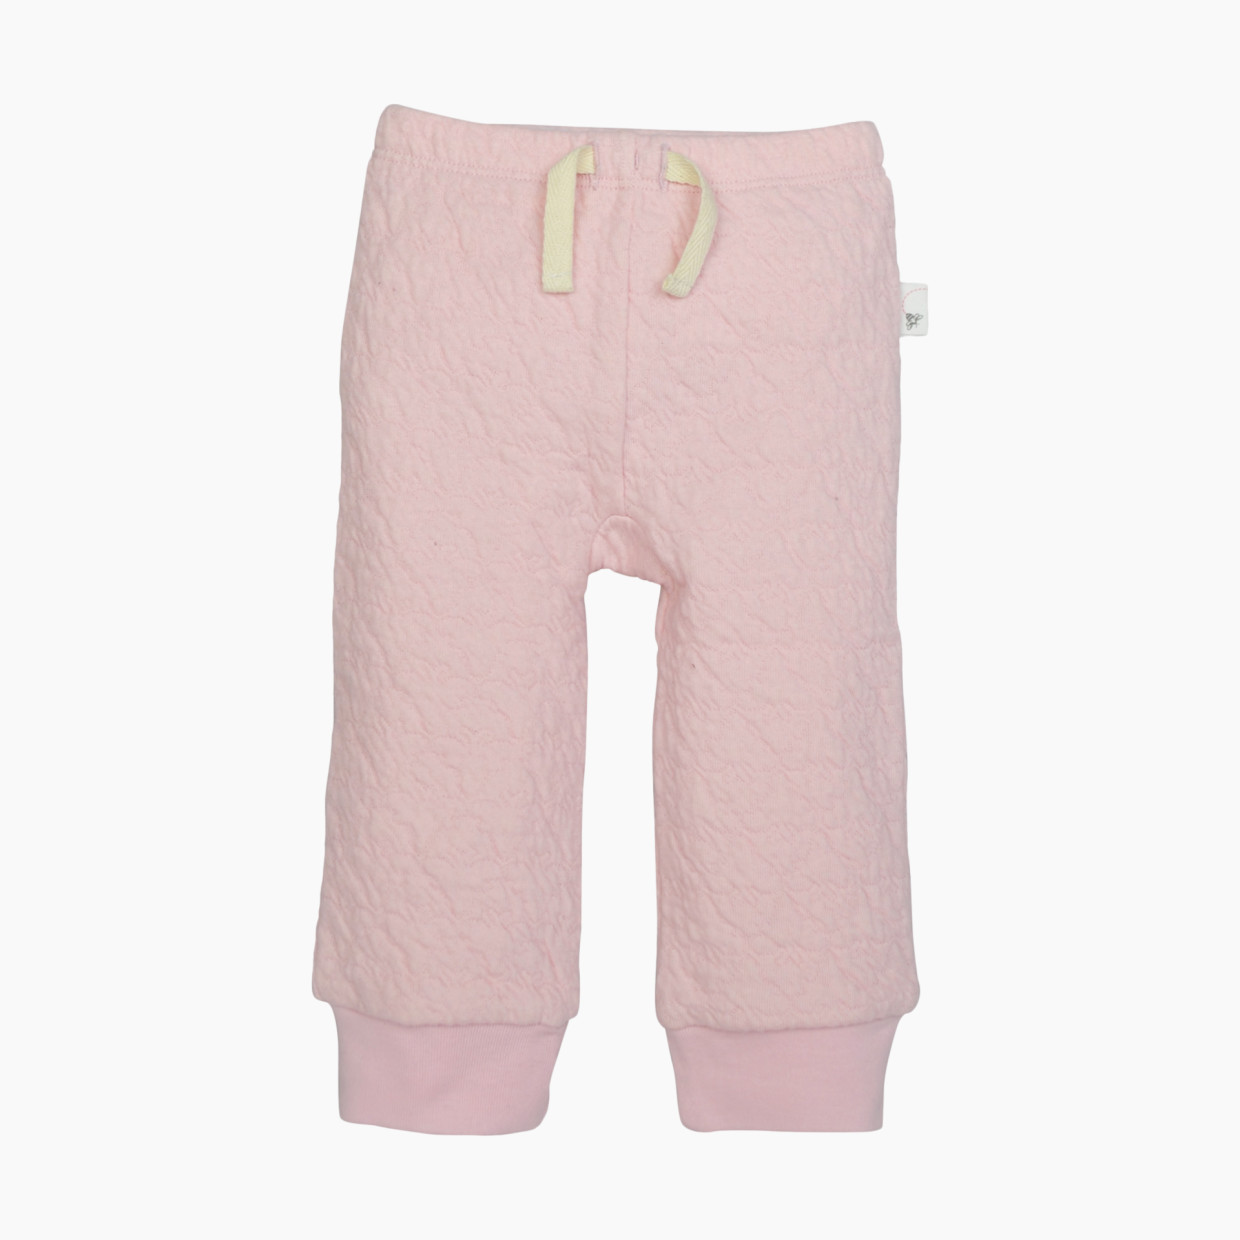 Burt's Bees Baby Organic Quilted Bee Pant - Blossom, 6-9 Months.